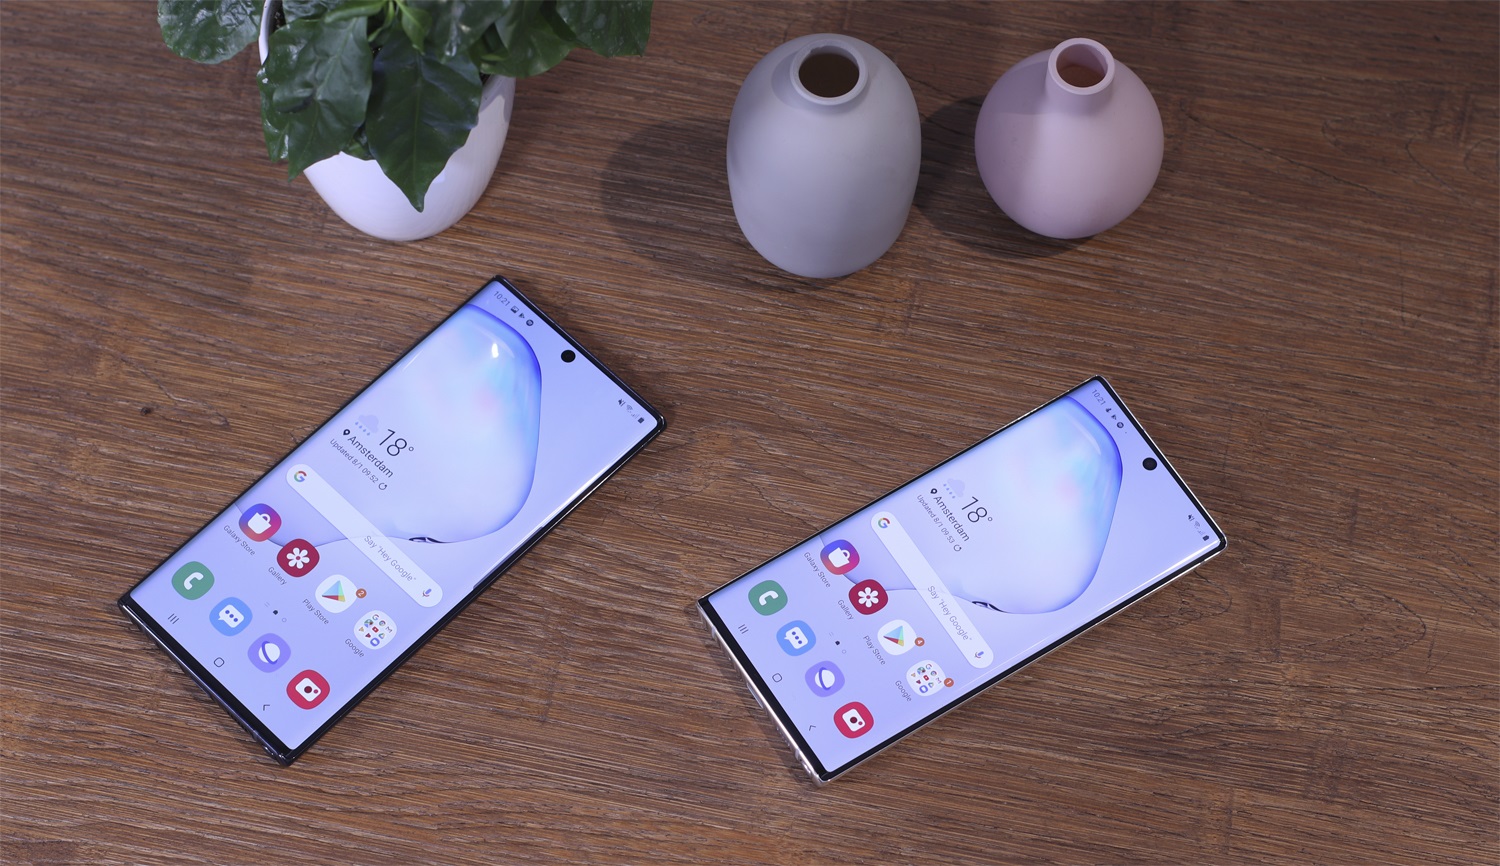 29 Samsung smartphones received a new version of One UI 3.1 - full list published